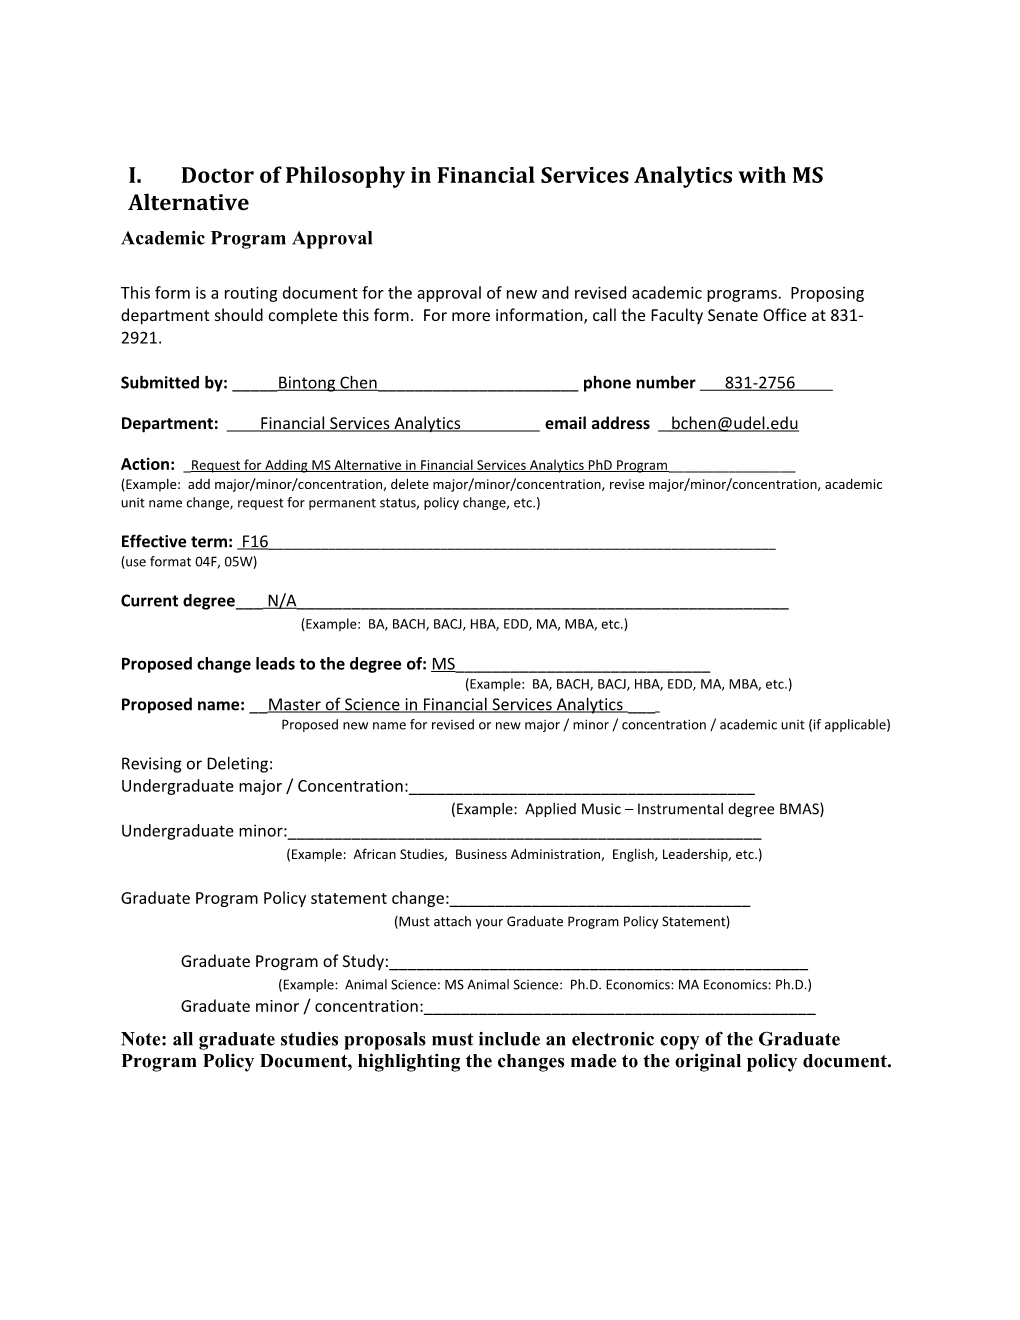 Itor of Philosophy in Financial Services Analytics with MS Alternative